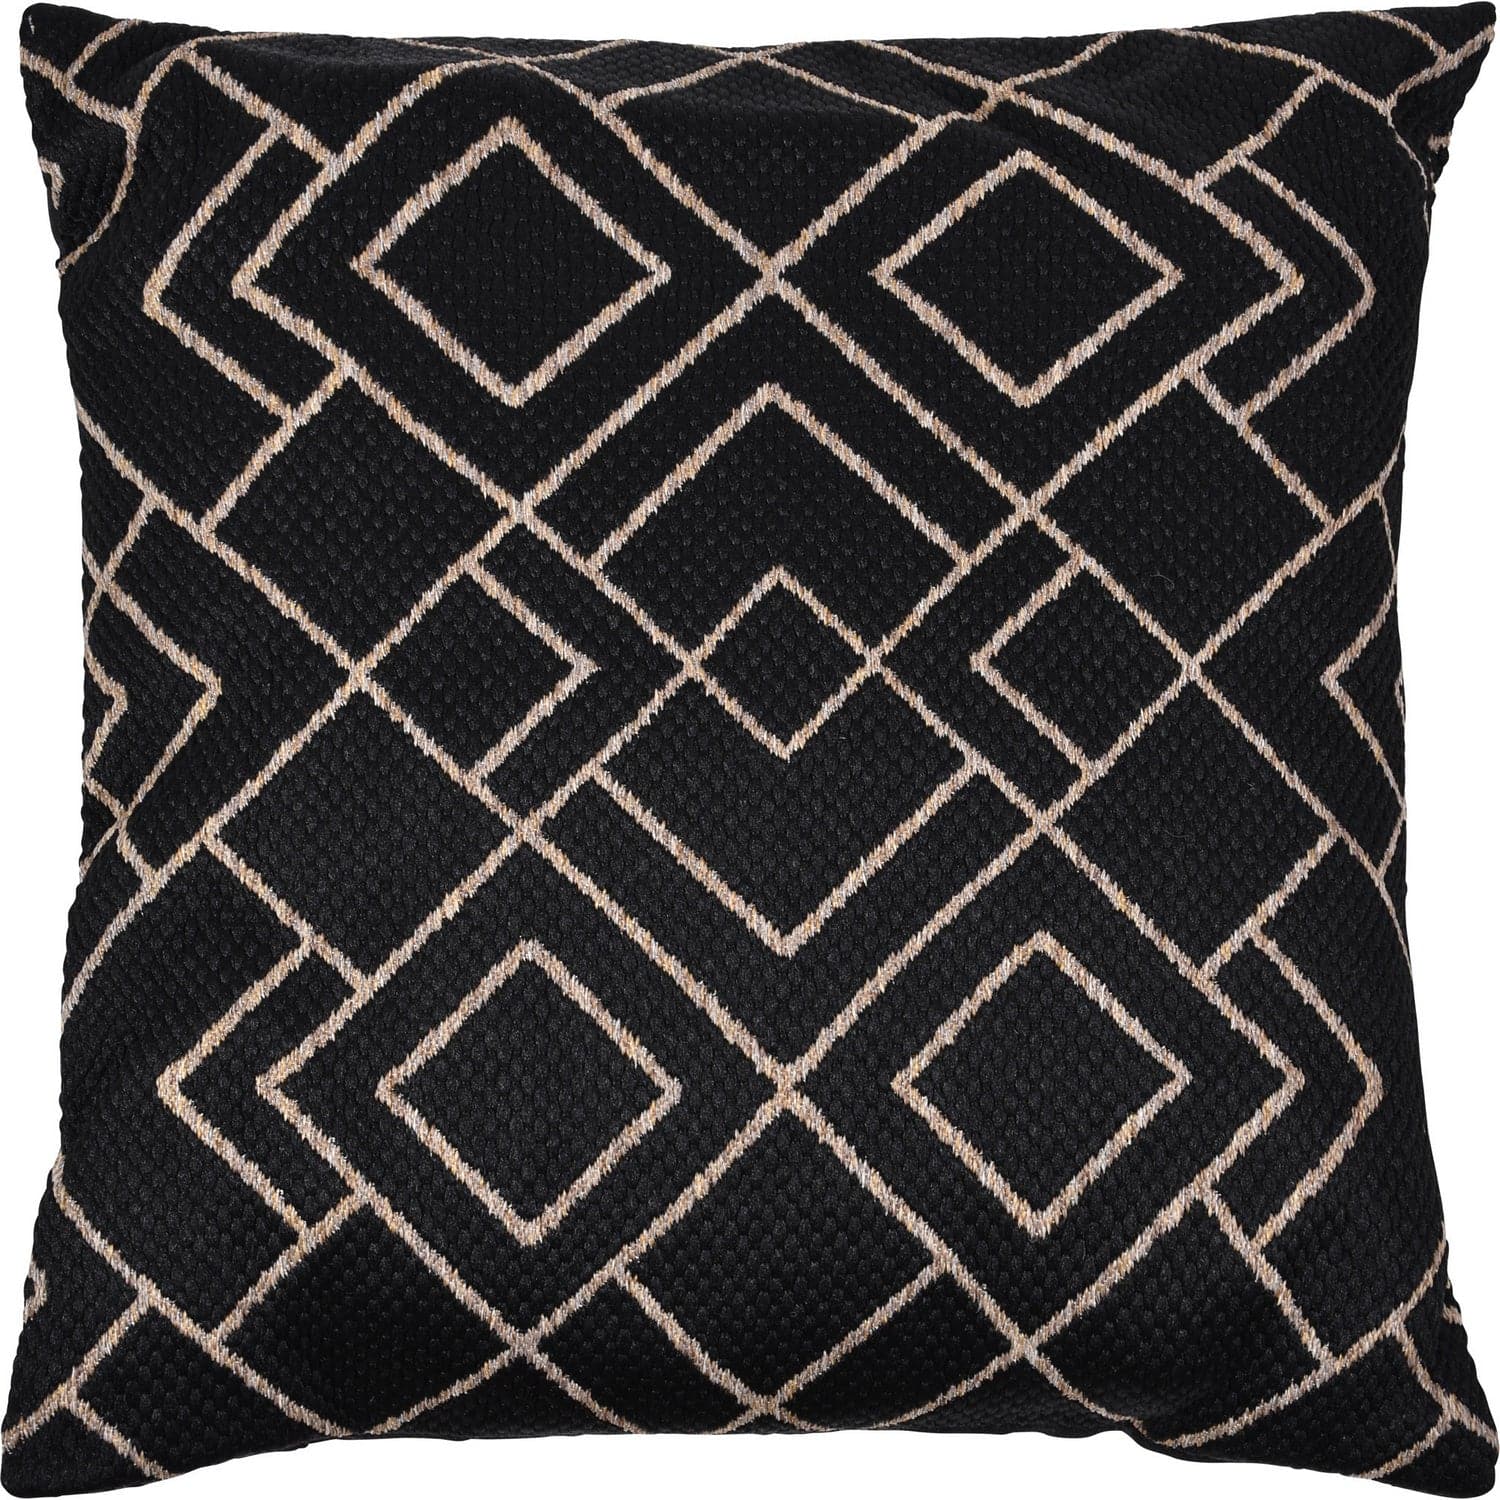 Renwil - PWFLX1021 - Home Accents - Rugs/Pillows/Blankets